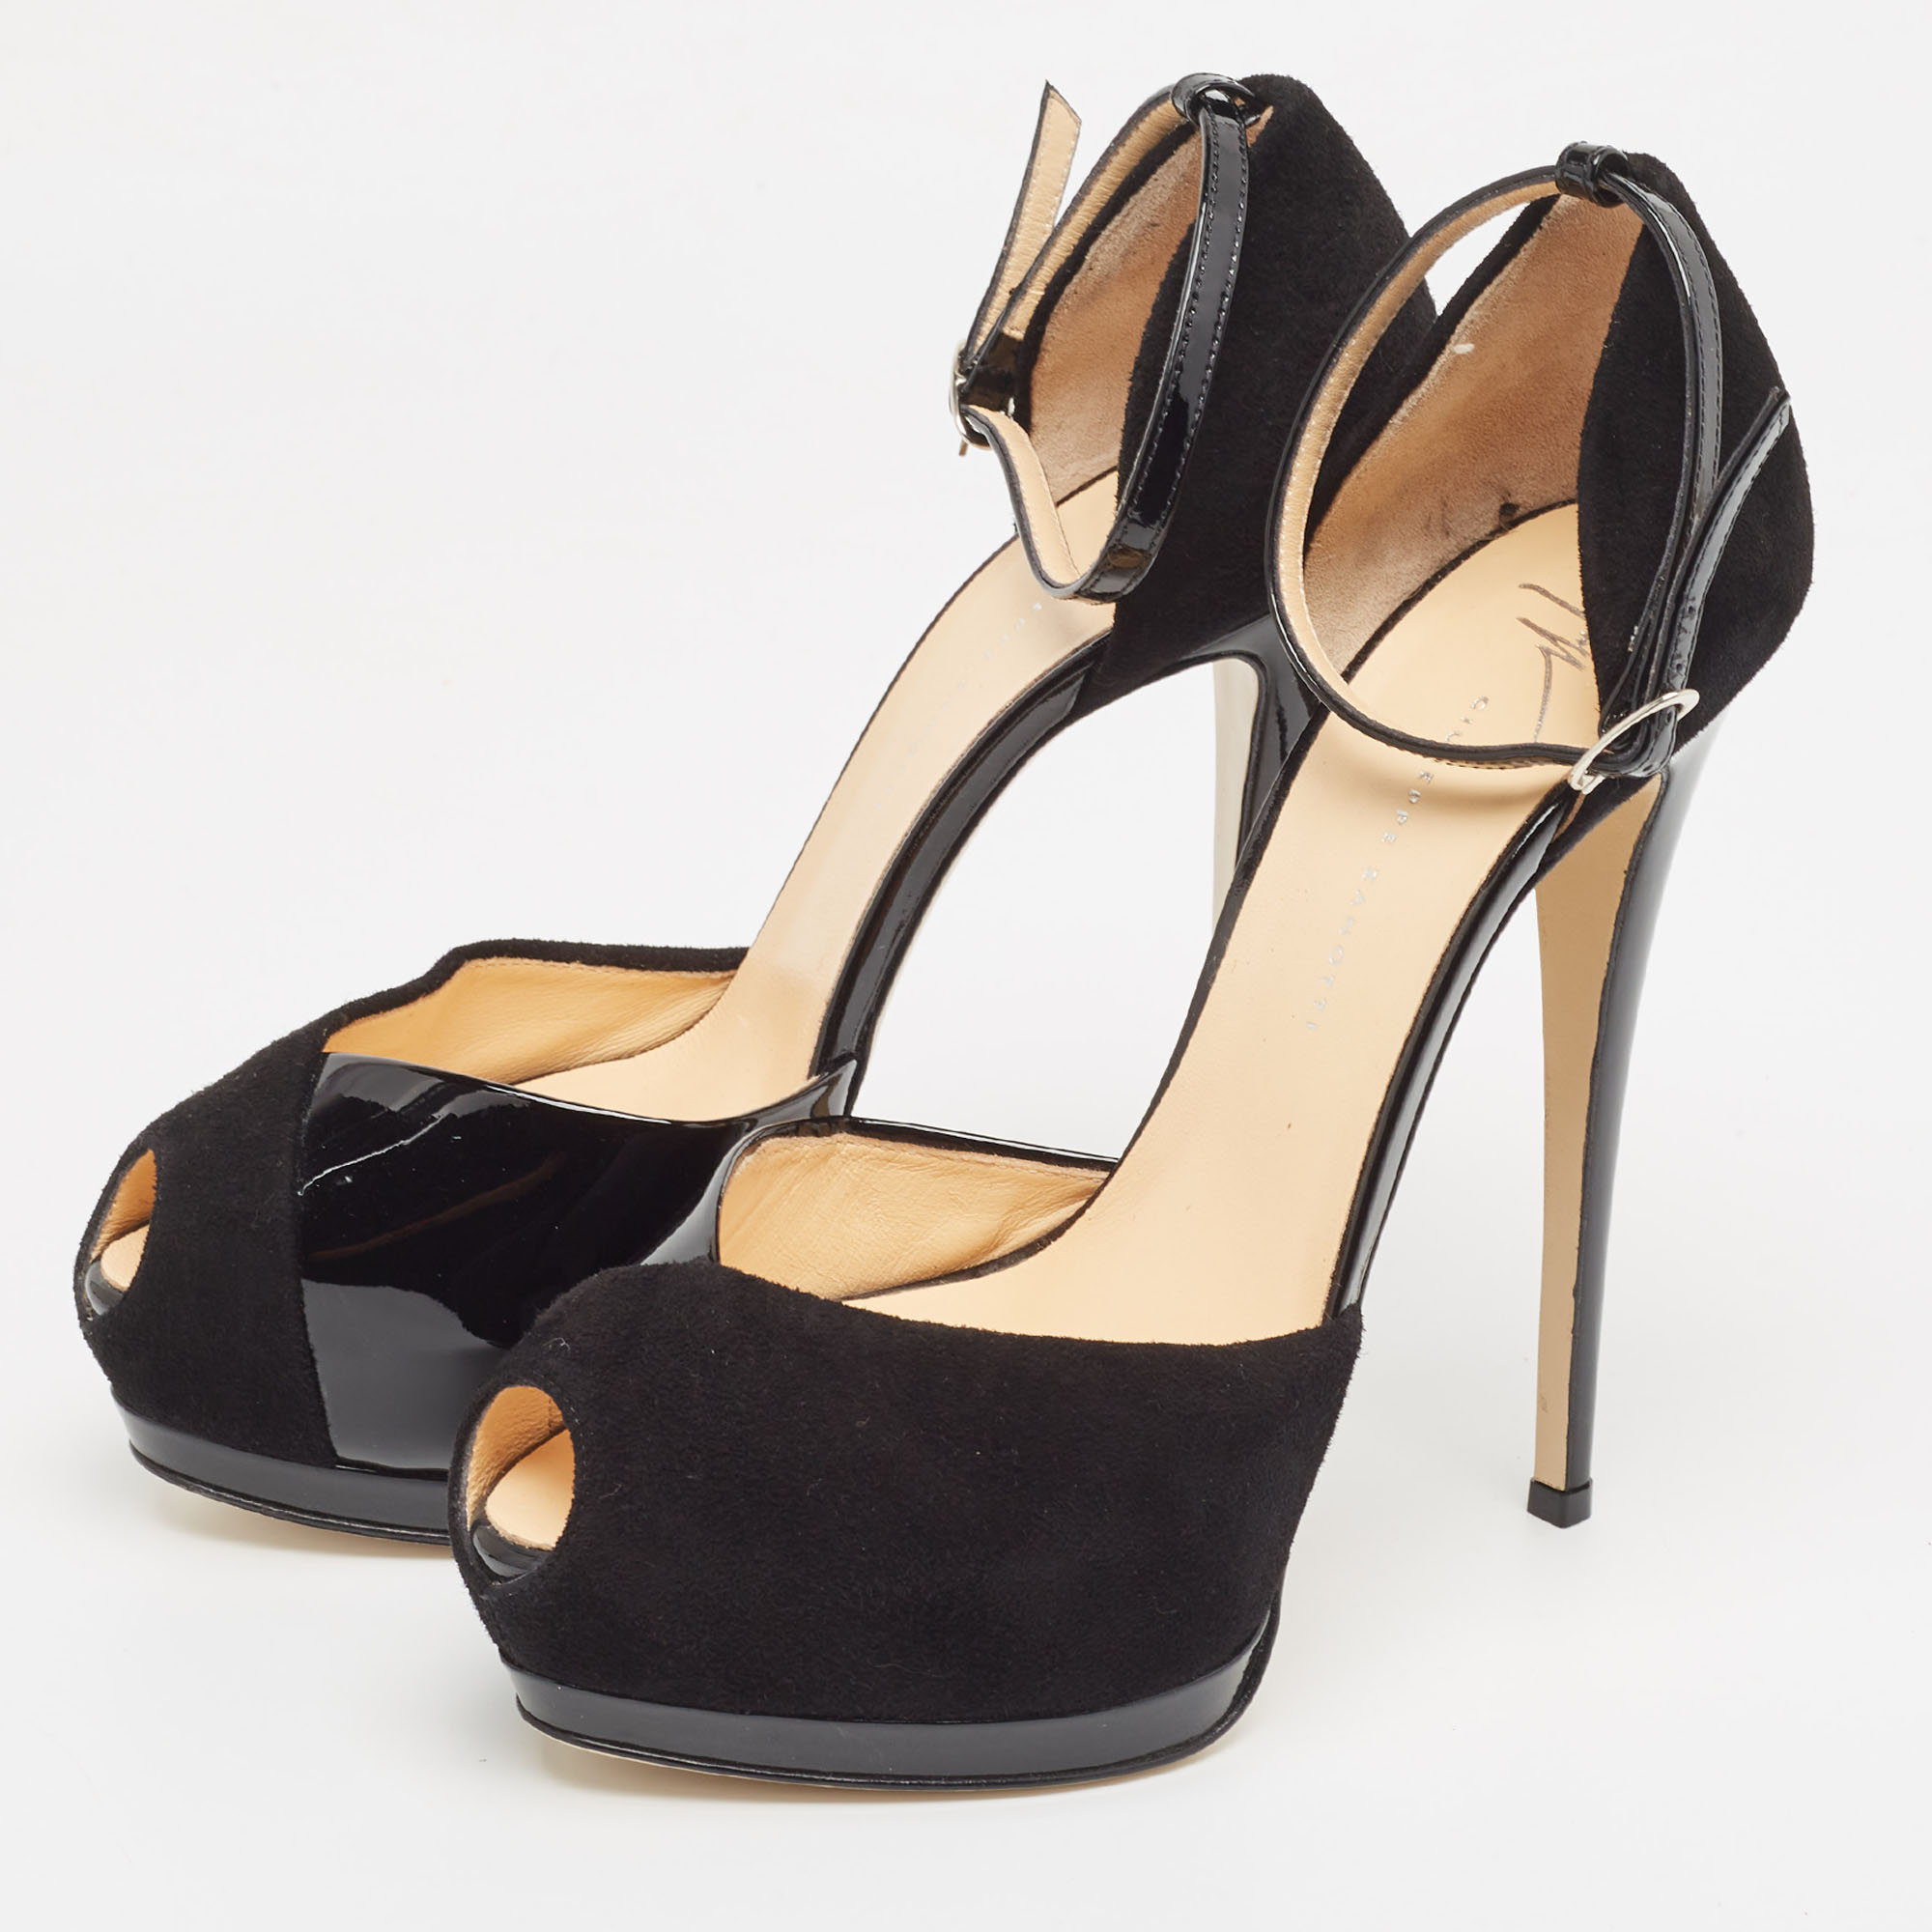 

Giuseppe Zanotti Black Suede and Patent Peep Toe Ankle Strap Sandals Size